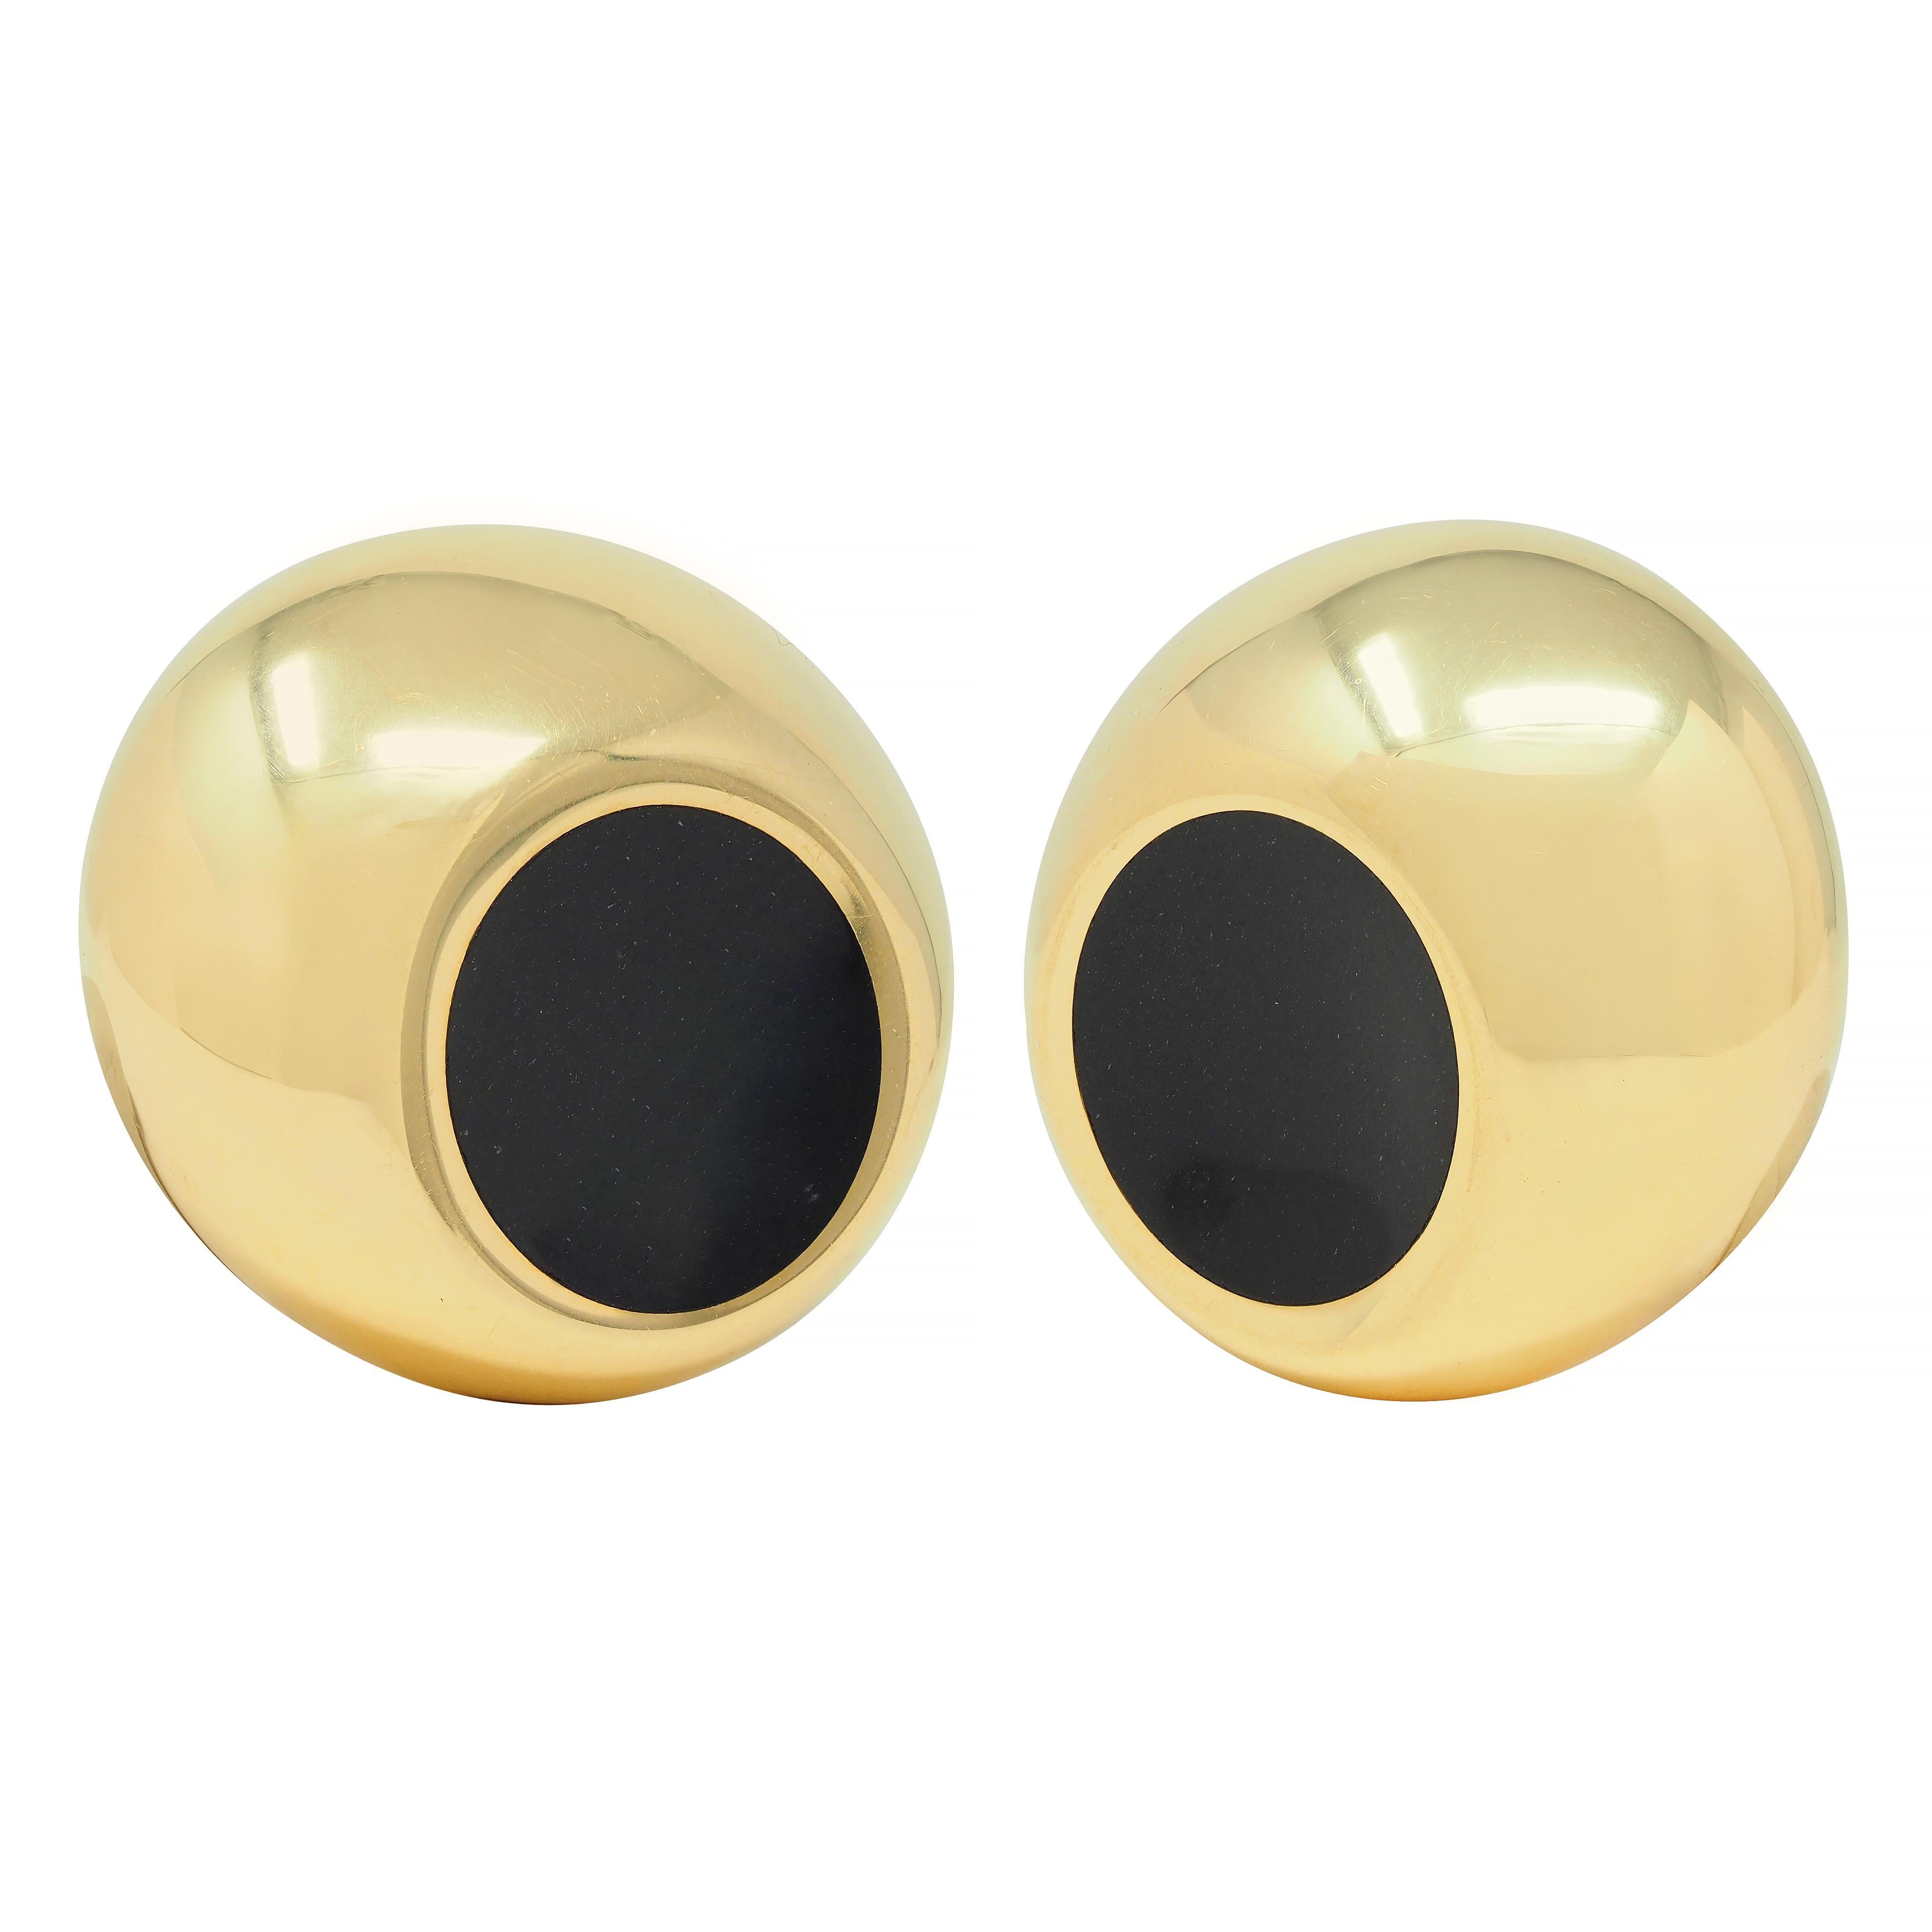 Designed as a round domed form with round imprint
Centering a 12.5 mm round inlaid tablet of onyx 
Opaque black with glossy finish 
With high polish gold finish
Completed by hinged omega back
Stamped with British assay marks for 18 karat